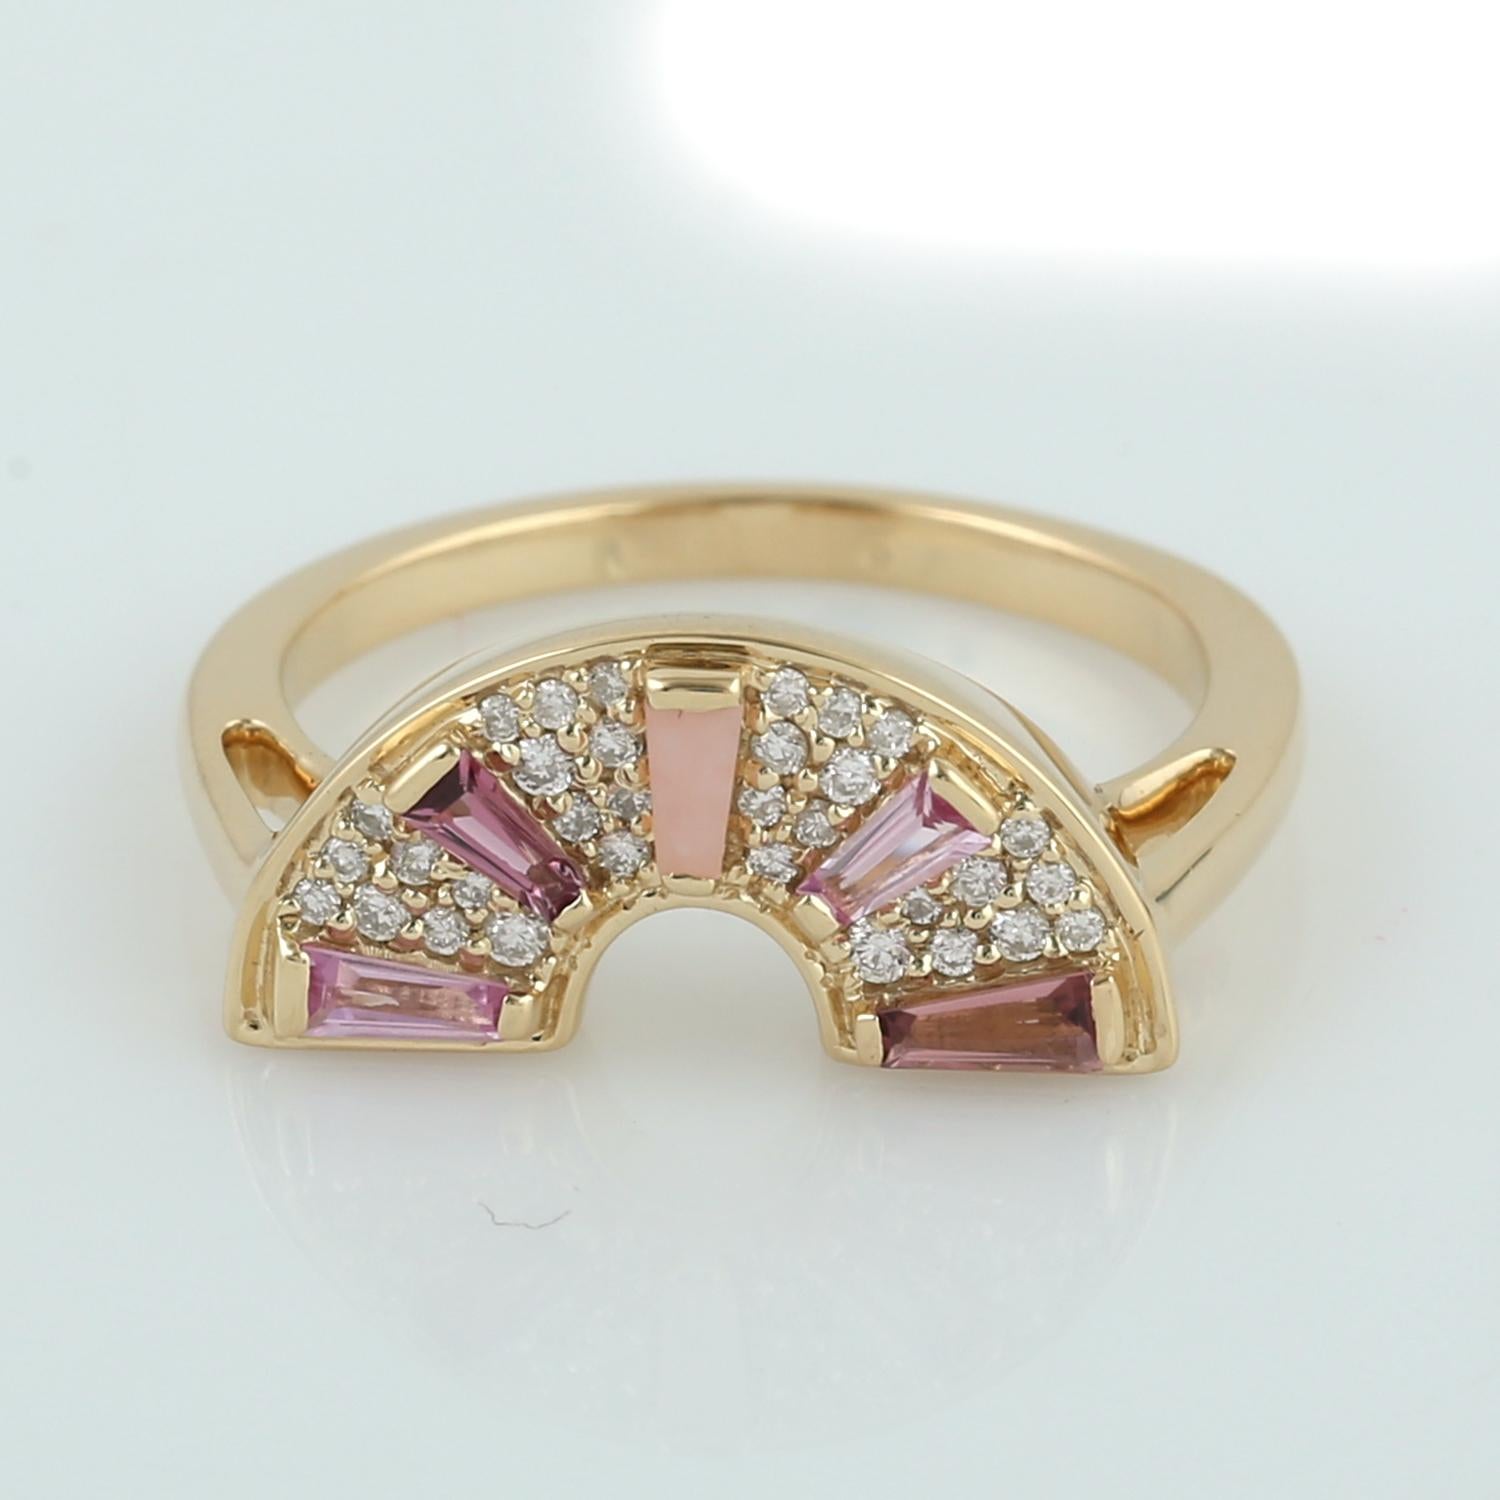 Contemporary Multi Gemstone Half Disc Ring With Diamonds Made In 18k Yellow Gold For Sale